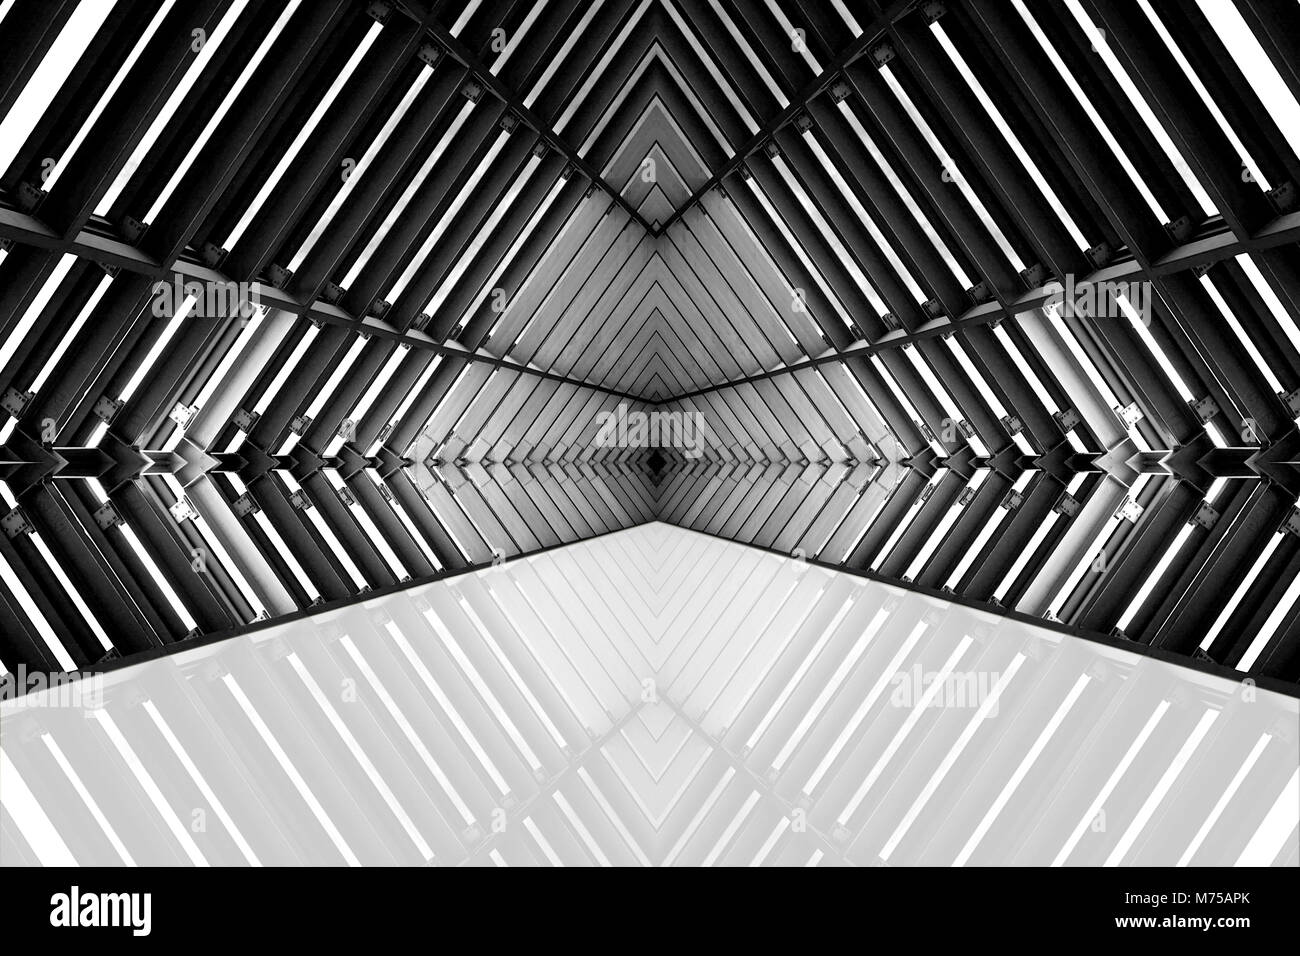 design of architecture metal structure similar to spaceship interior. abstract modern architecture black and white photo. Stock Photo